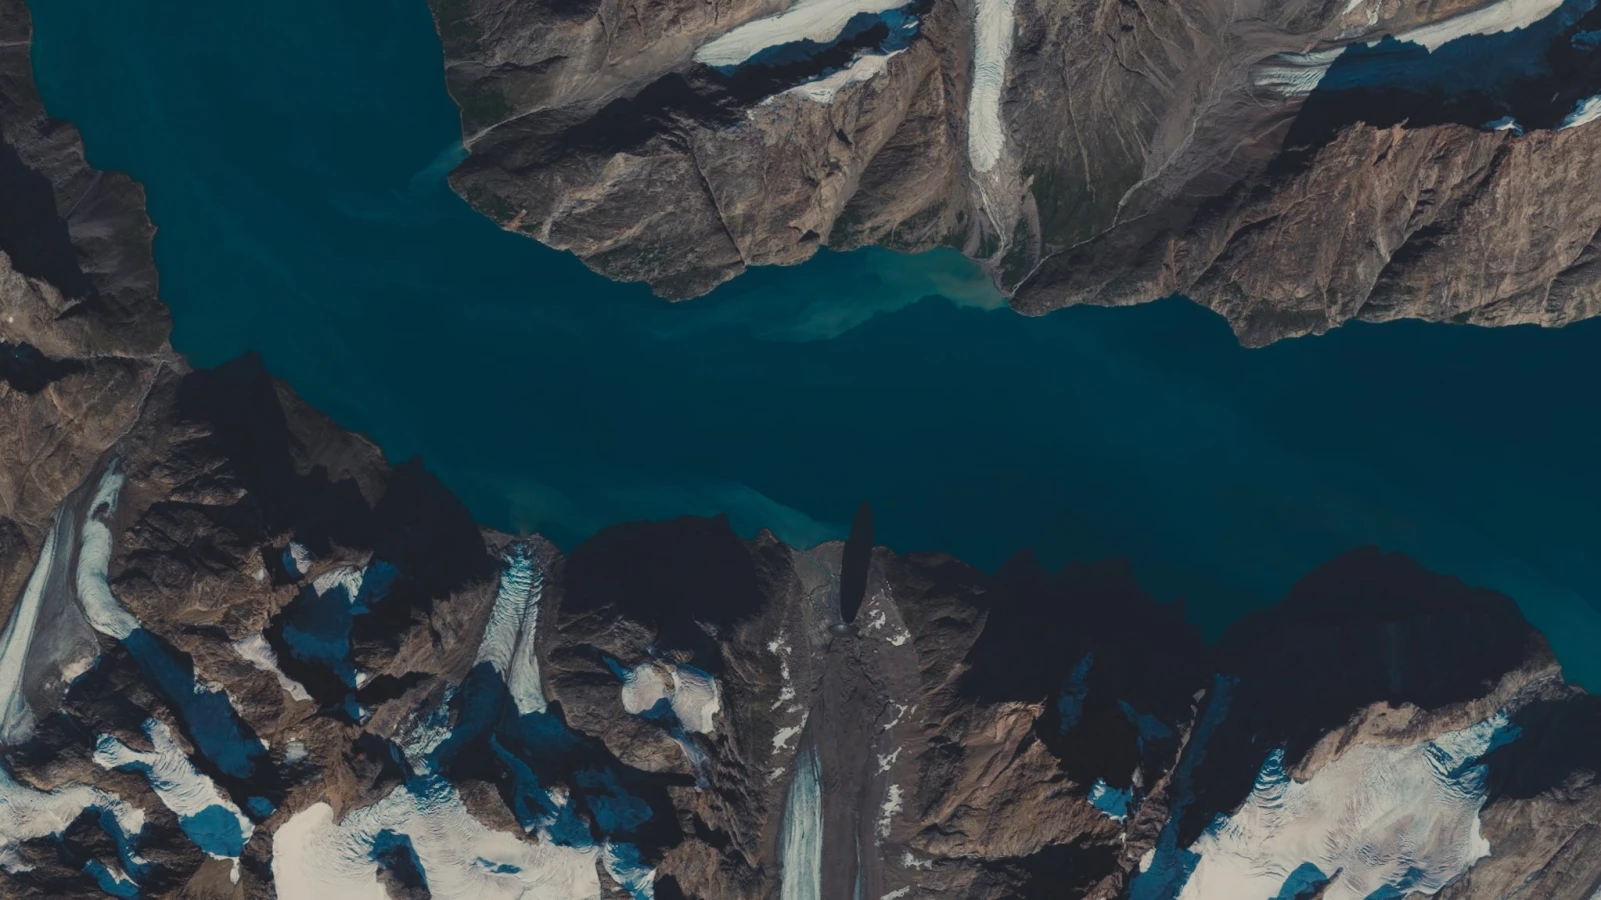  Arrival aerial view spaceship in Greenland Raynault vfx 